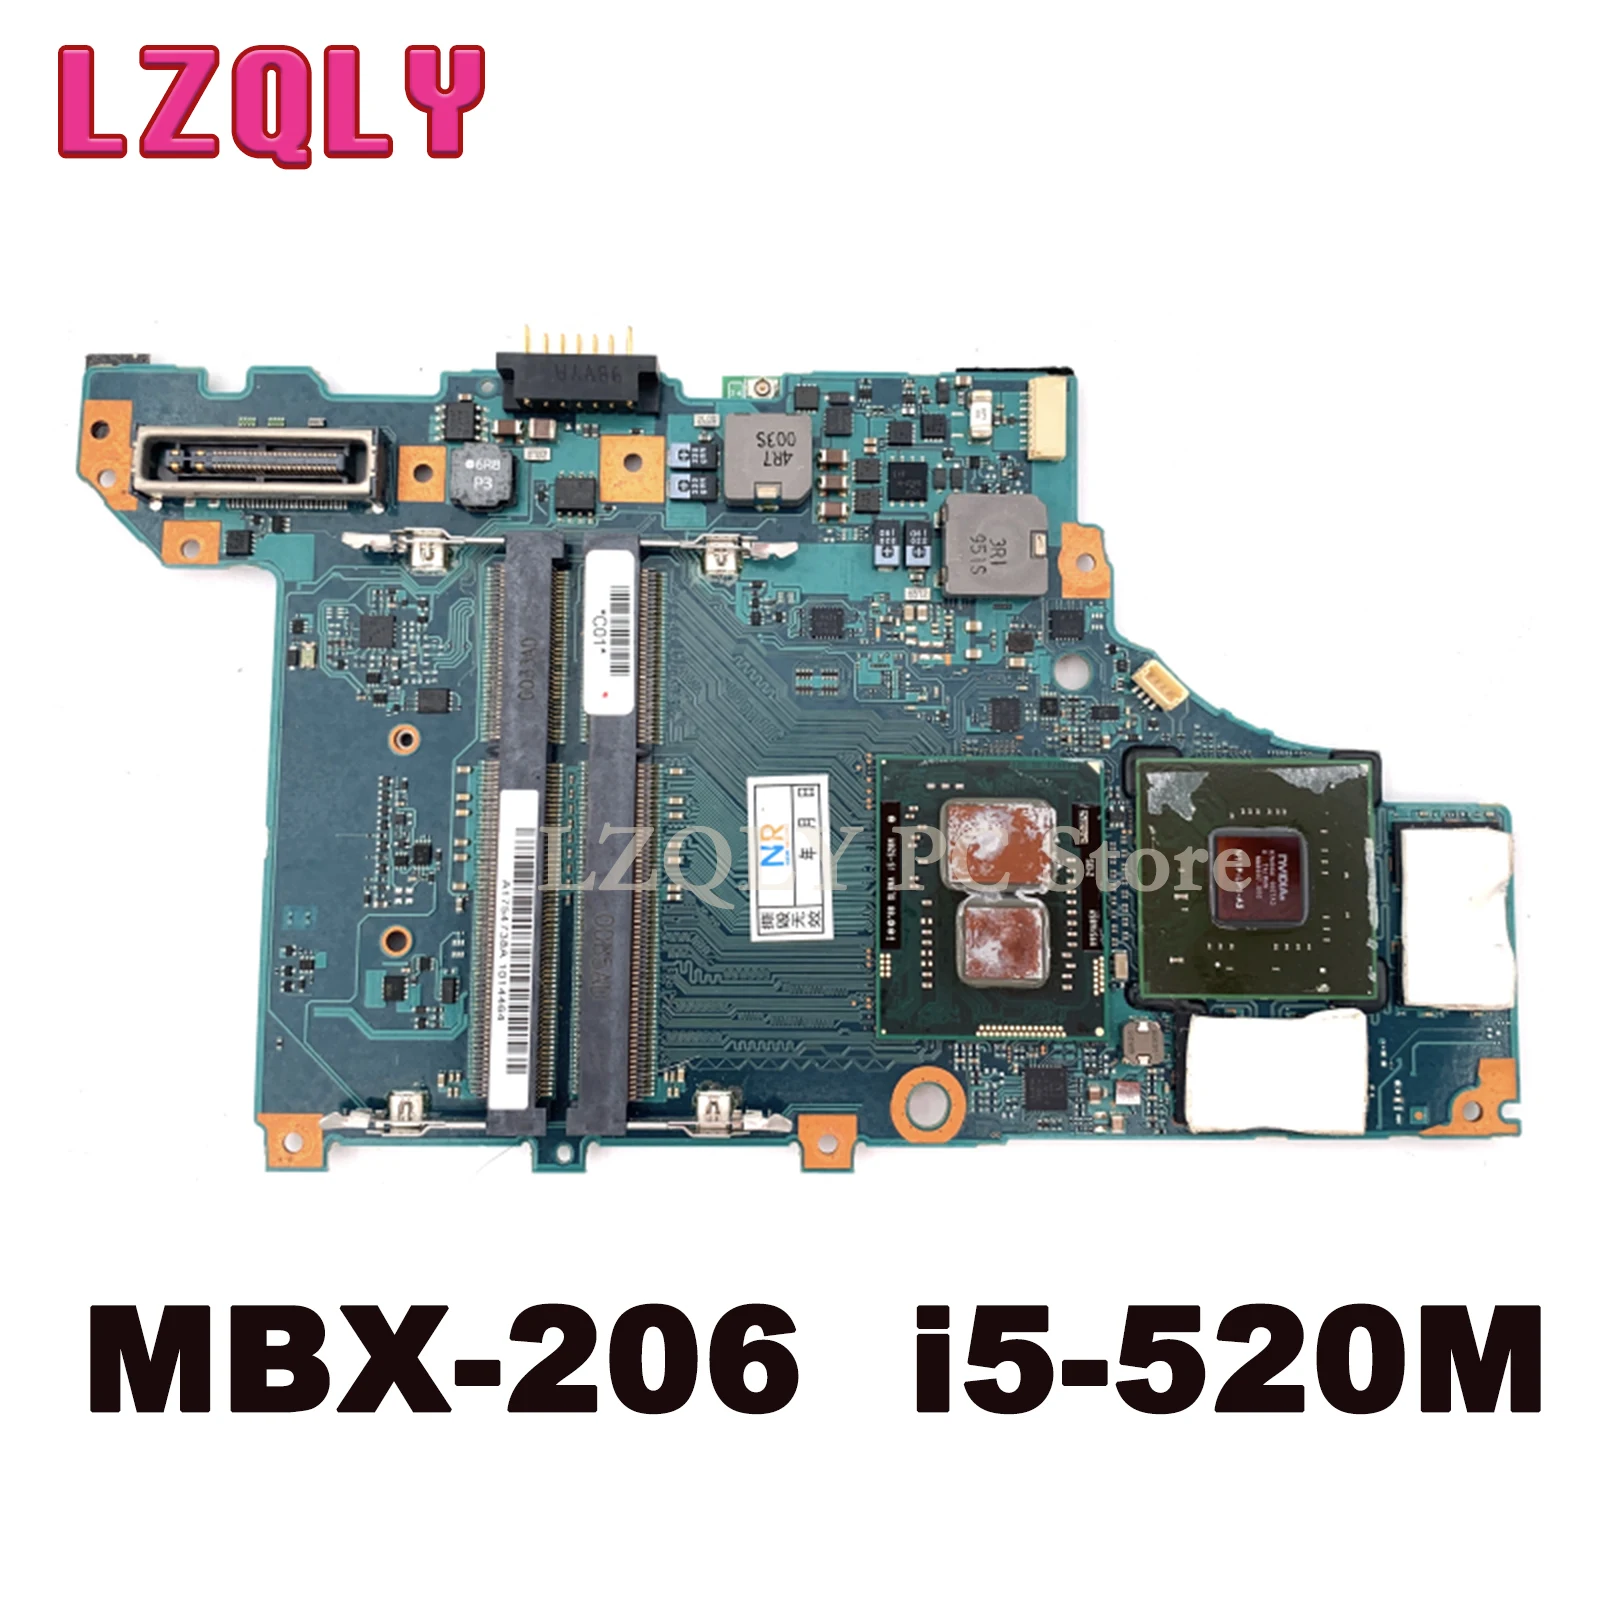 

LZQLY For Sony Vaio VPCZ1 A1754738A MBX-206 Laptop Motherboard I5-520M CPU DDR3 Main Board Fully Tested